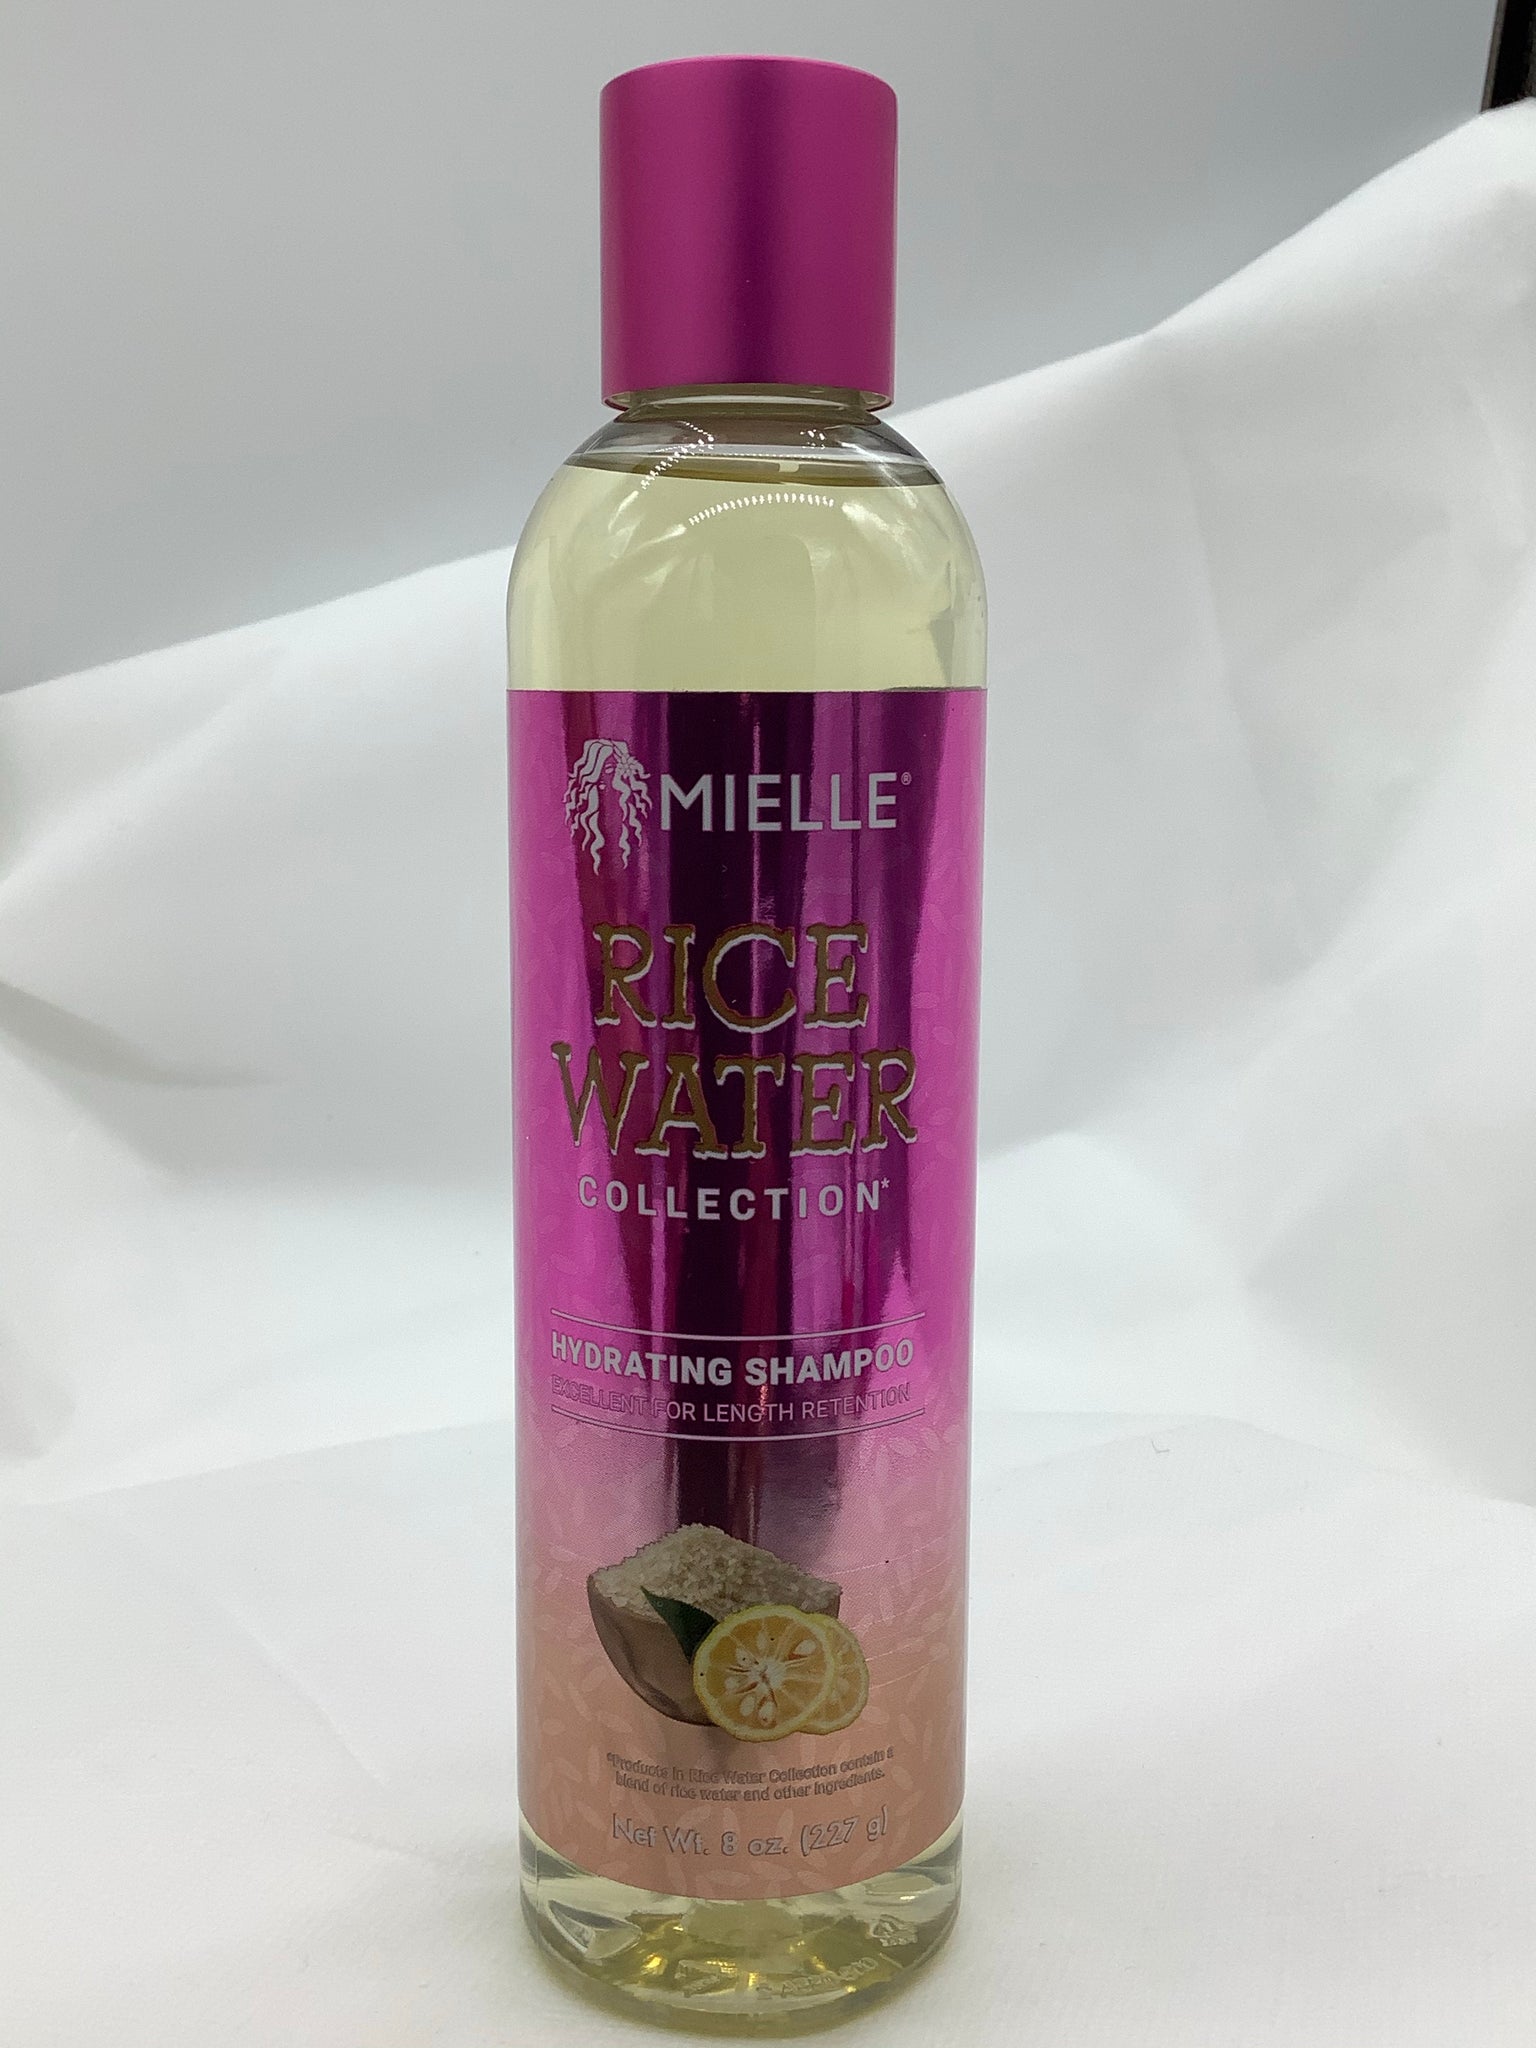 Mielle Rice Water Collection Hydrating Shampoo - 8 oz 